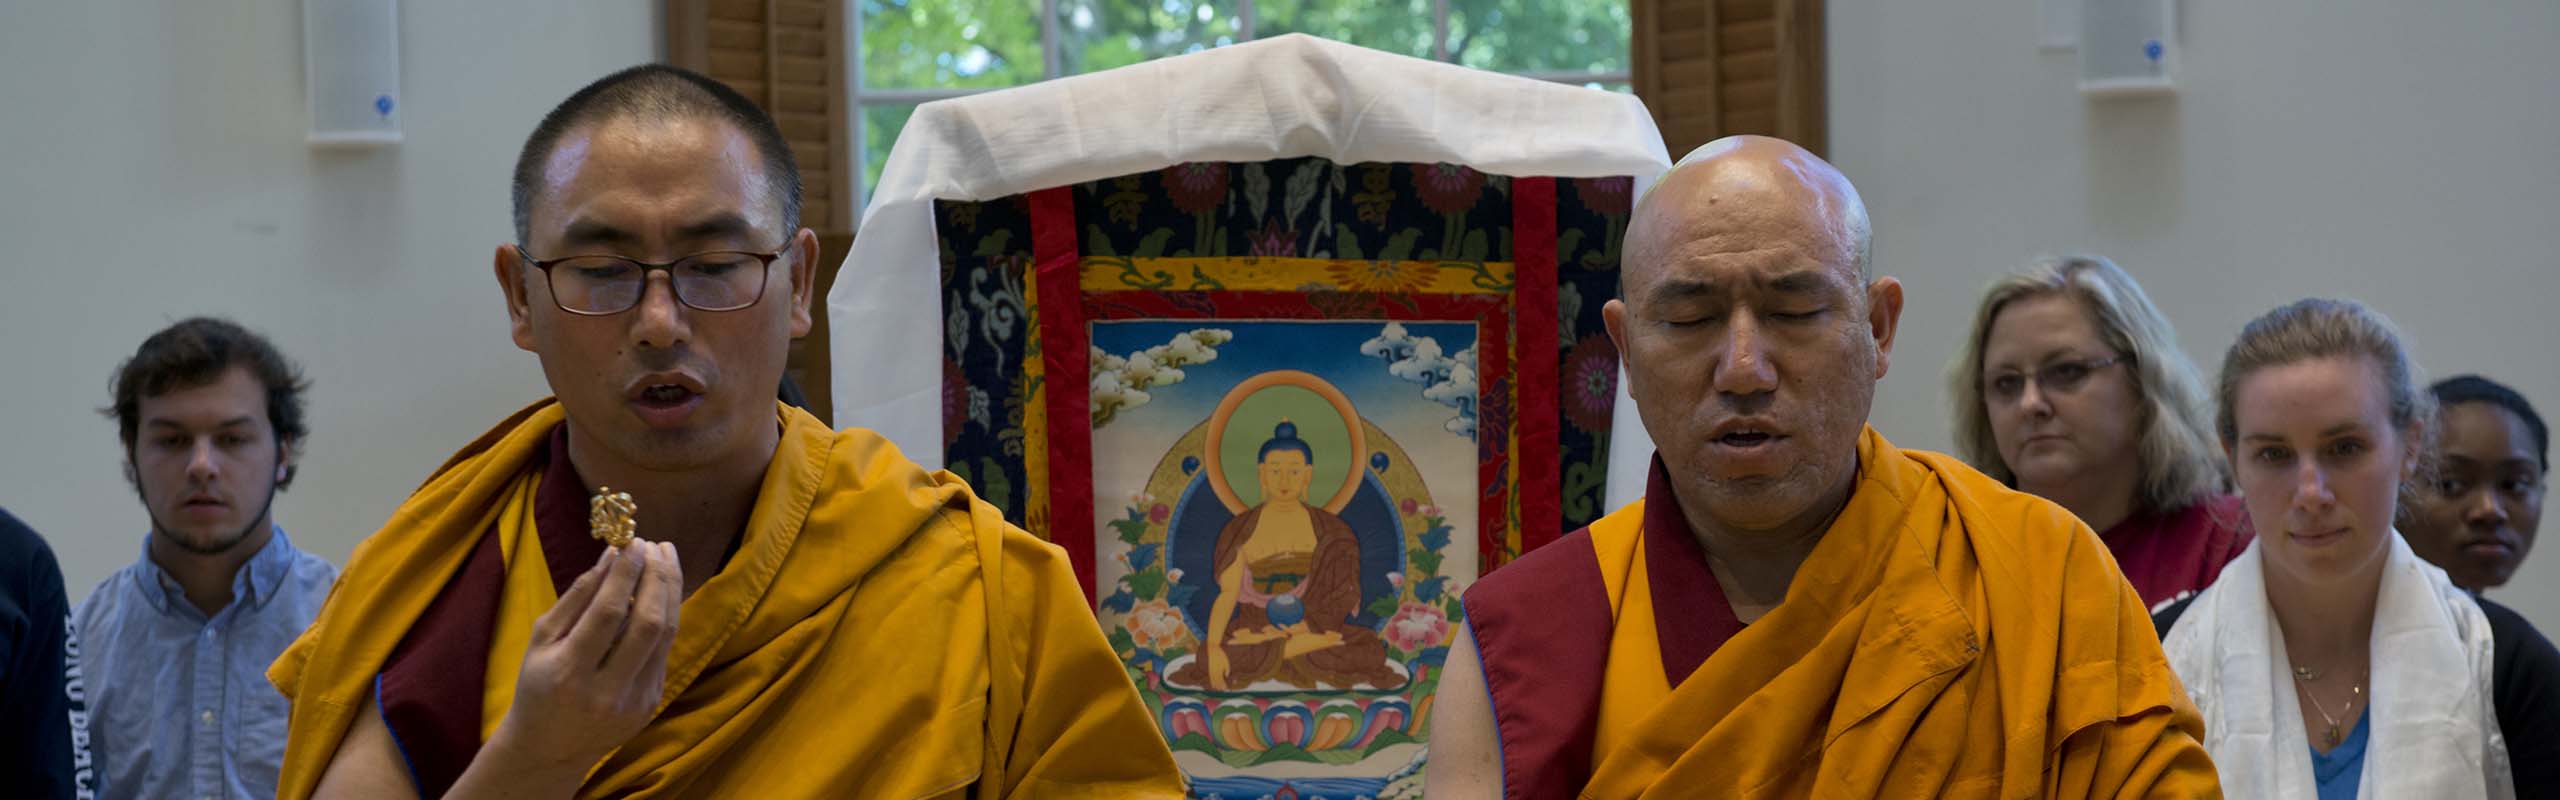 Buddhist monks from the Kadampa Center in Raleigh during the sand mandala closing ceremony. The two destroyed the completed mandala by swirling the various colors into the center of the display.